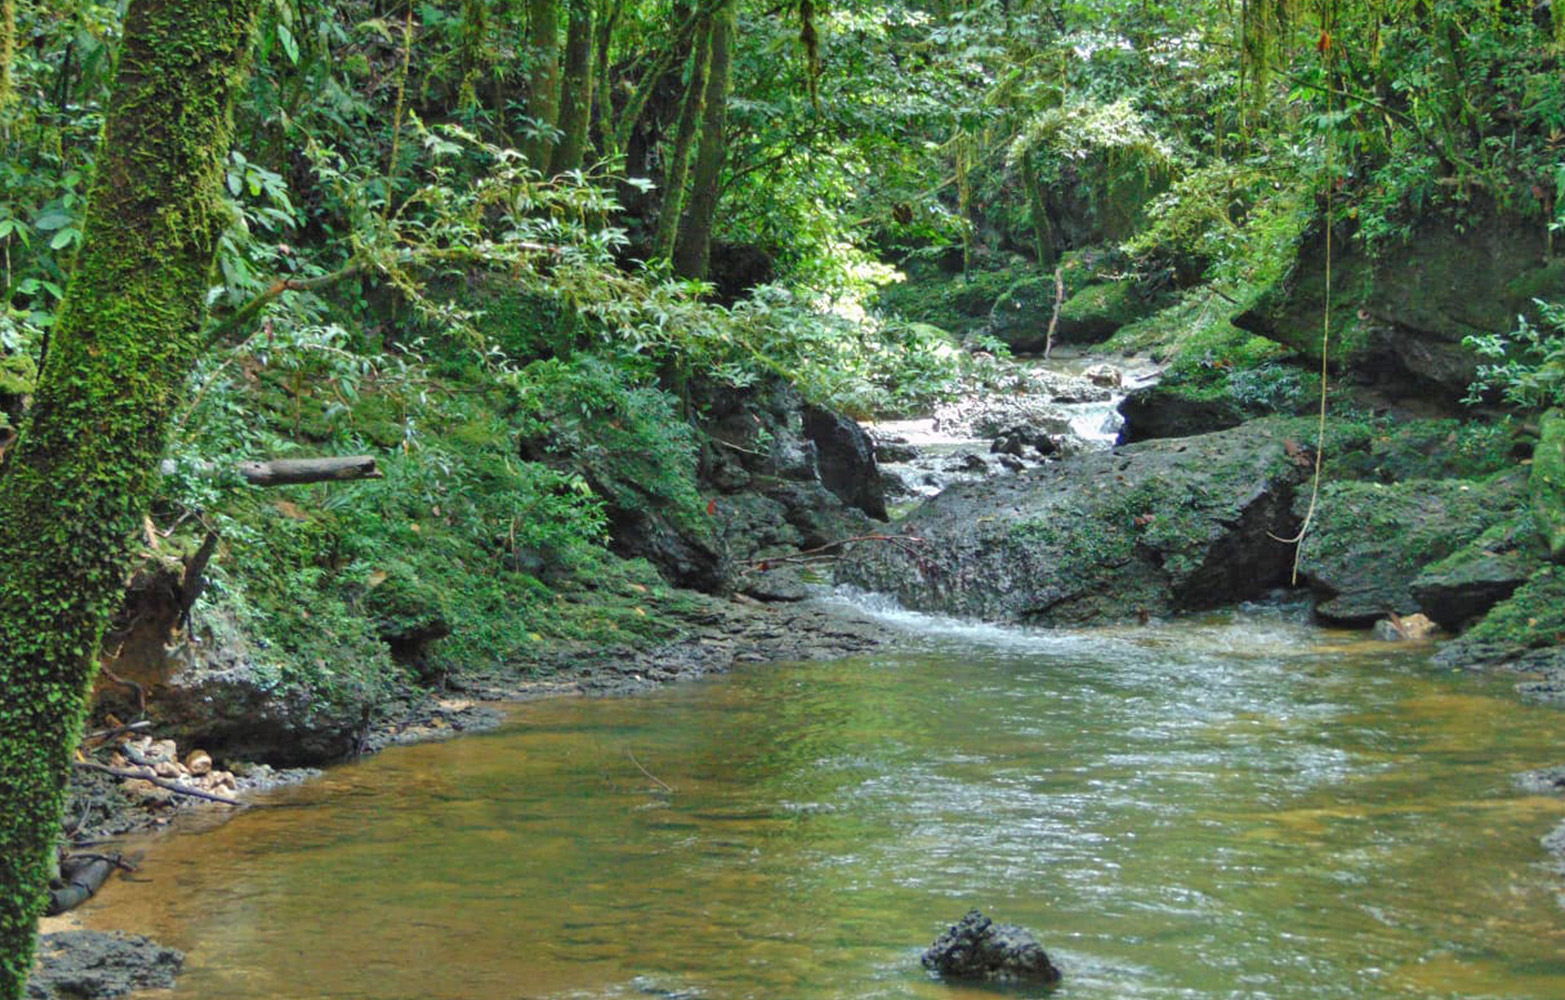 A tributary of the Borin River in the Traditional Forest of the Baho Clan of the Aifat Tribe